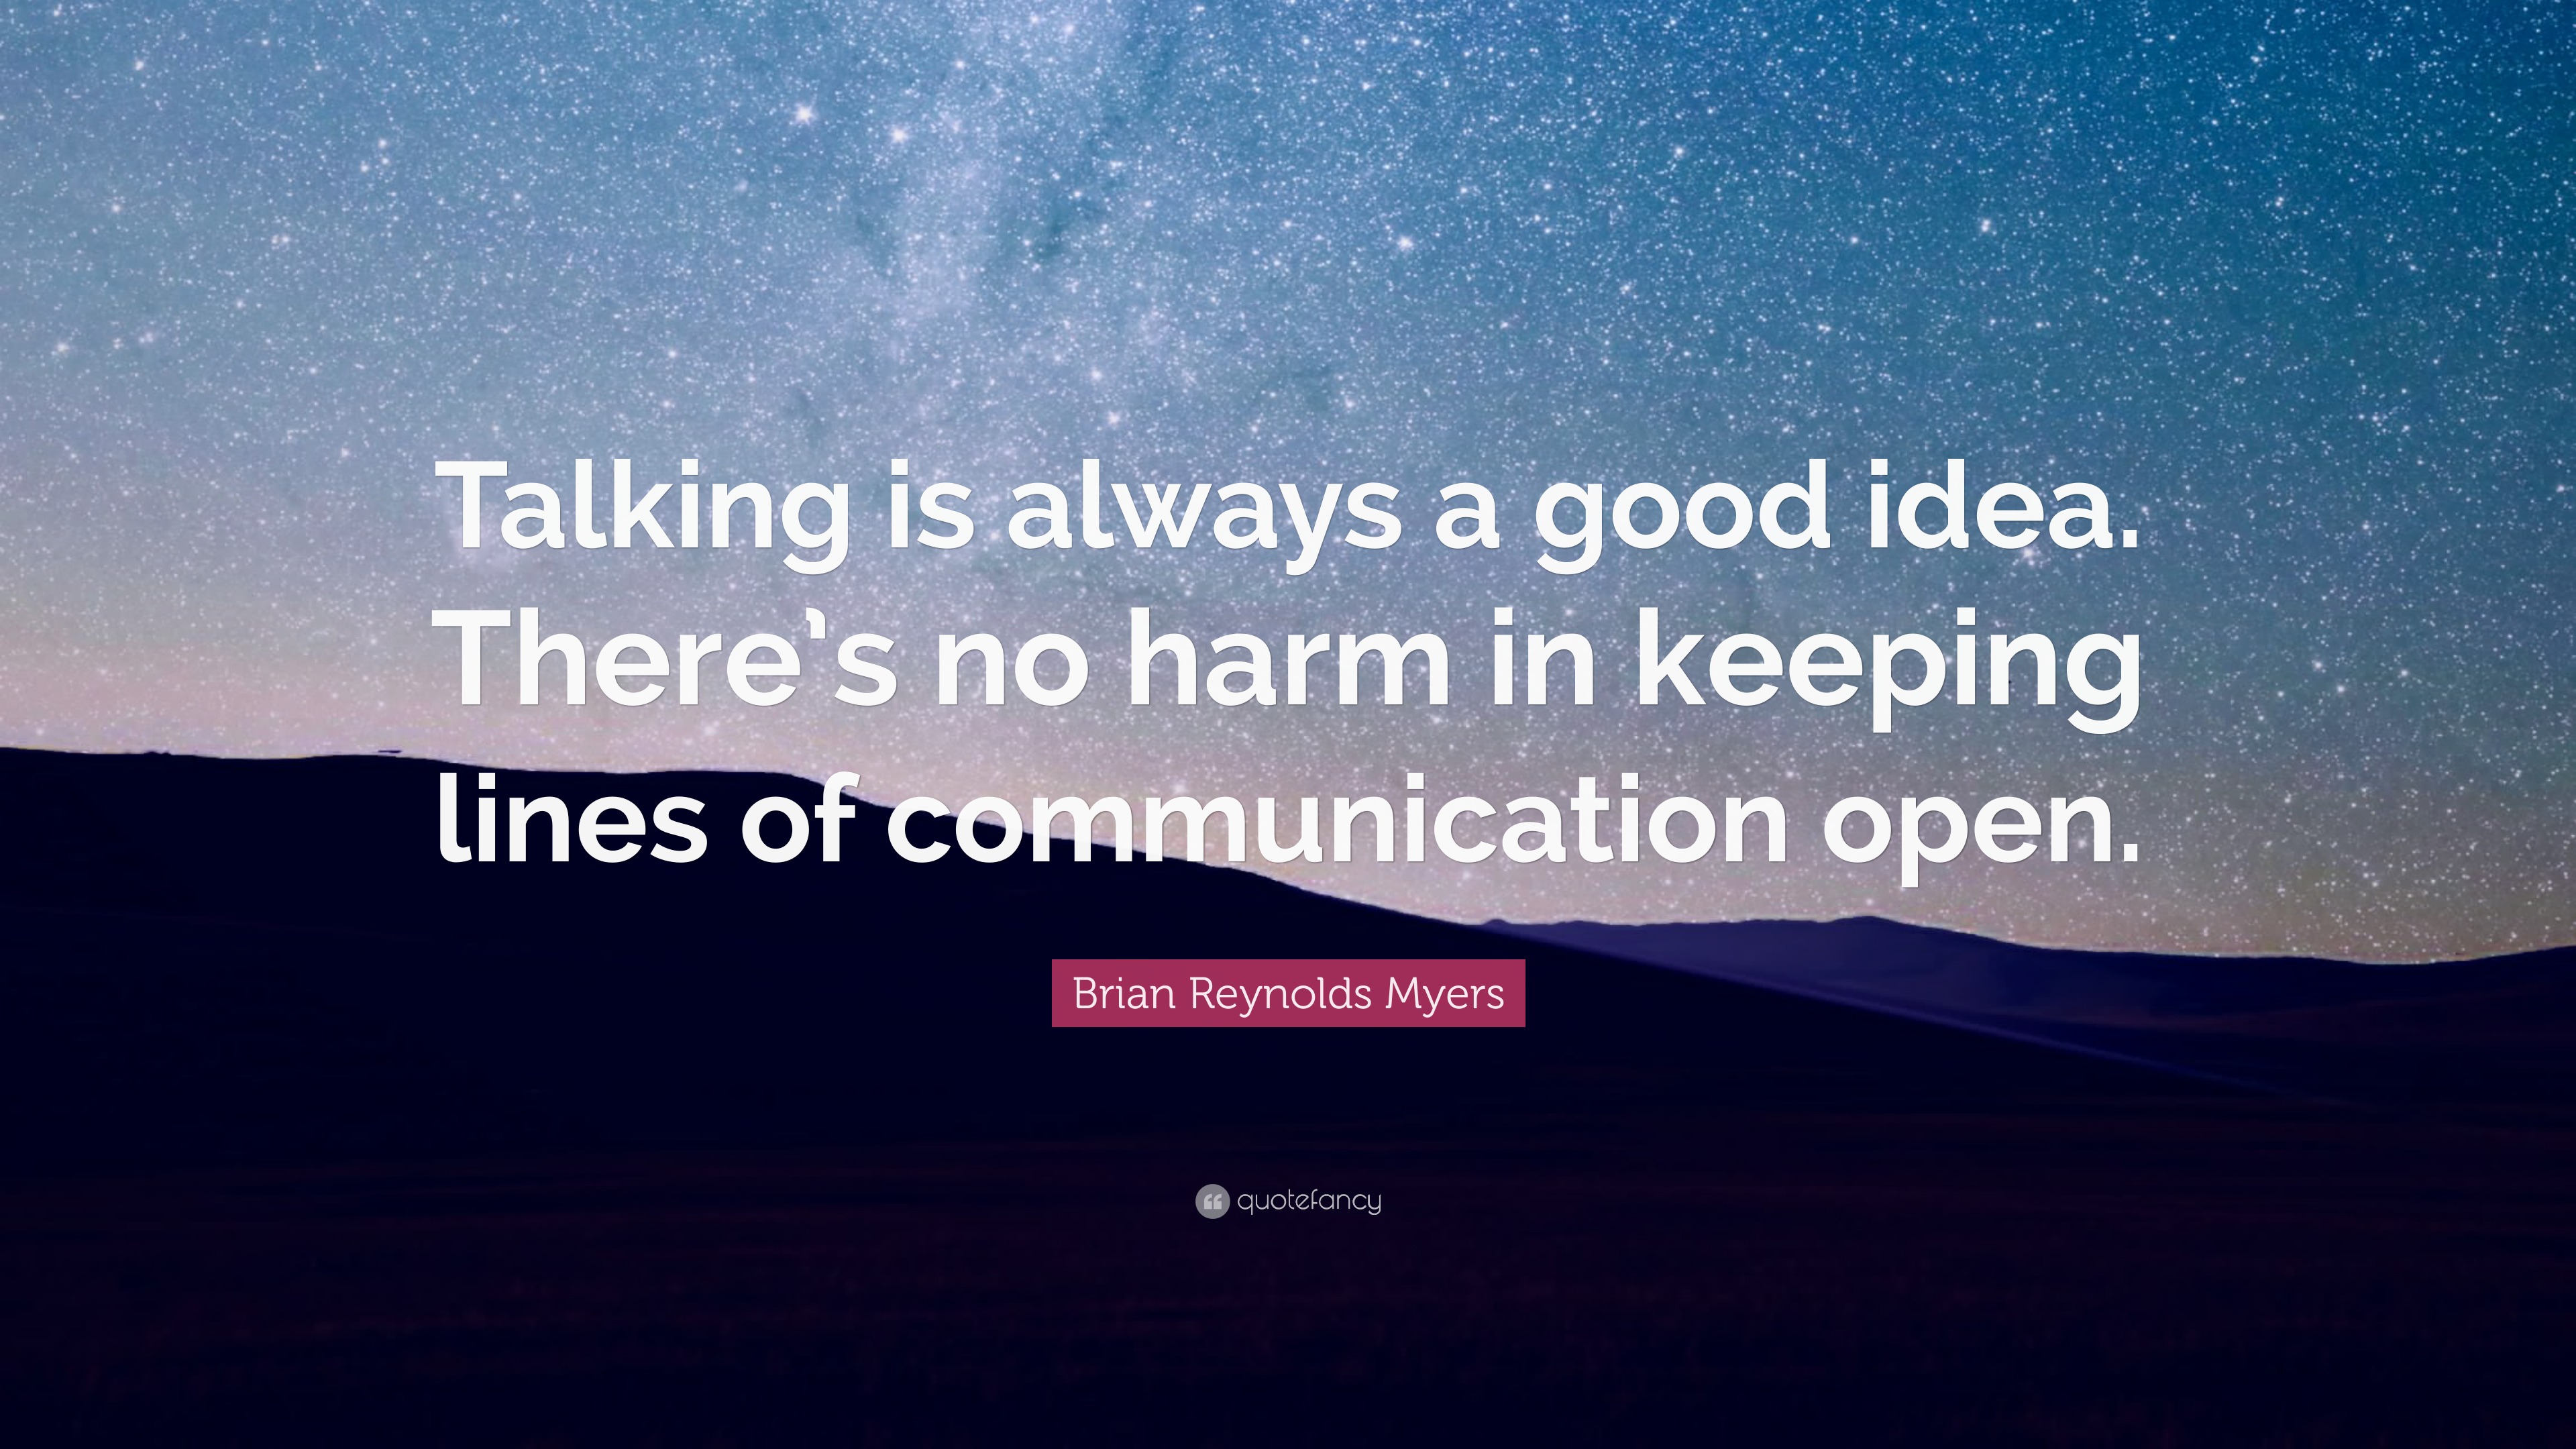 Brian Reynolds Myers Quote: “Talking is always a good idea. There’s no